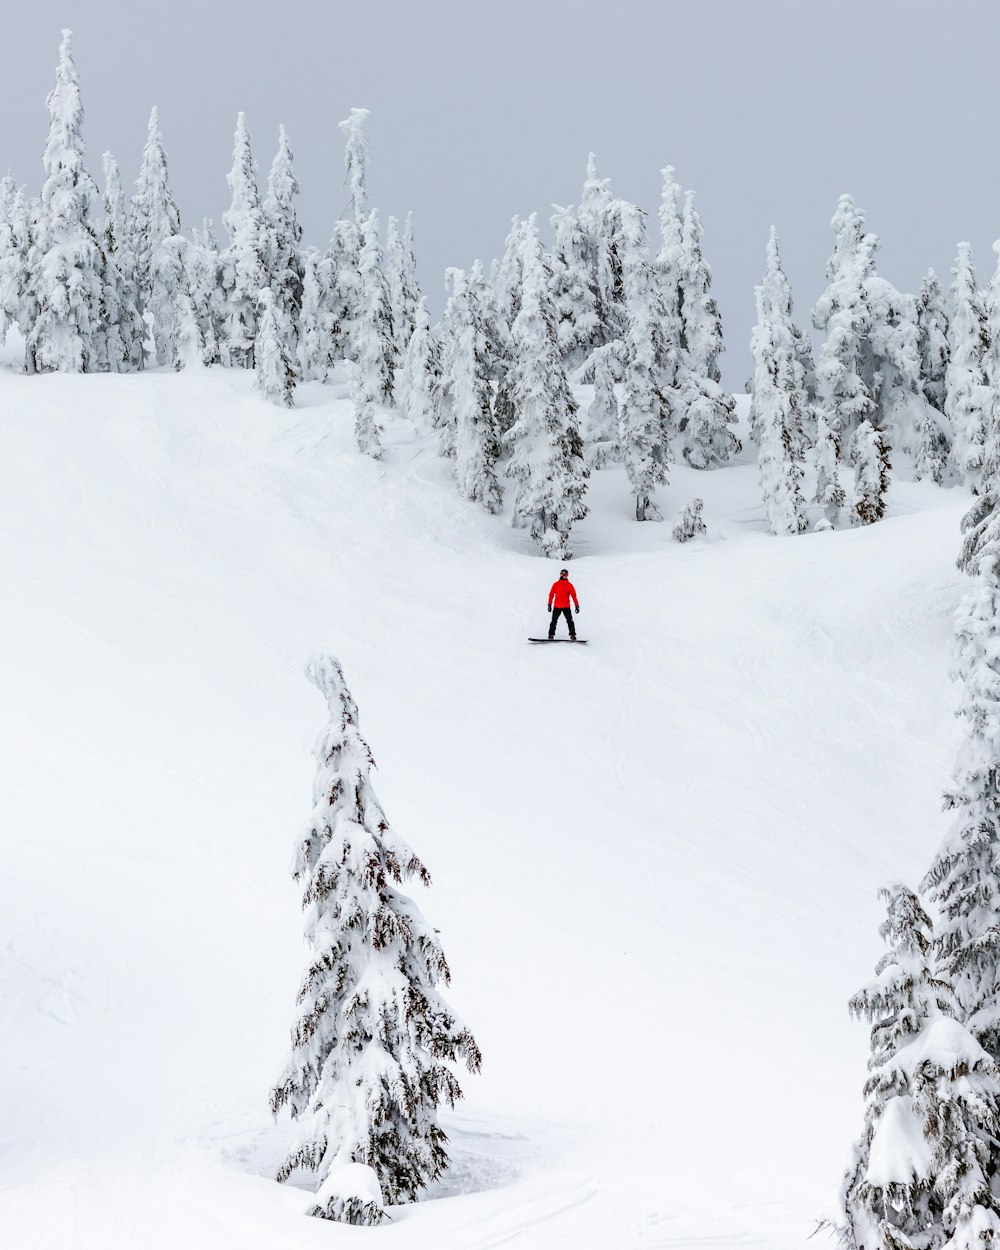 a person on a snowboard in the middle of a snowy mountain